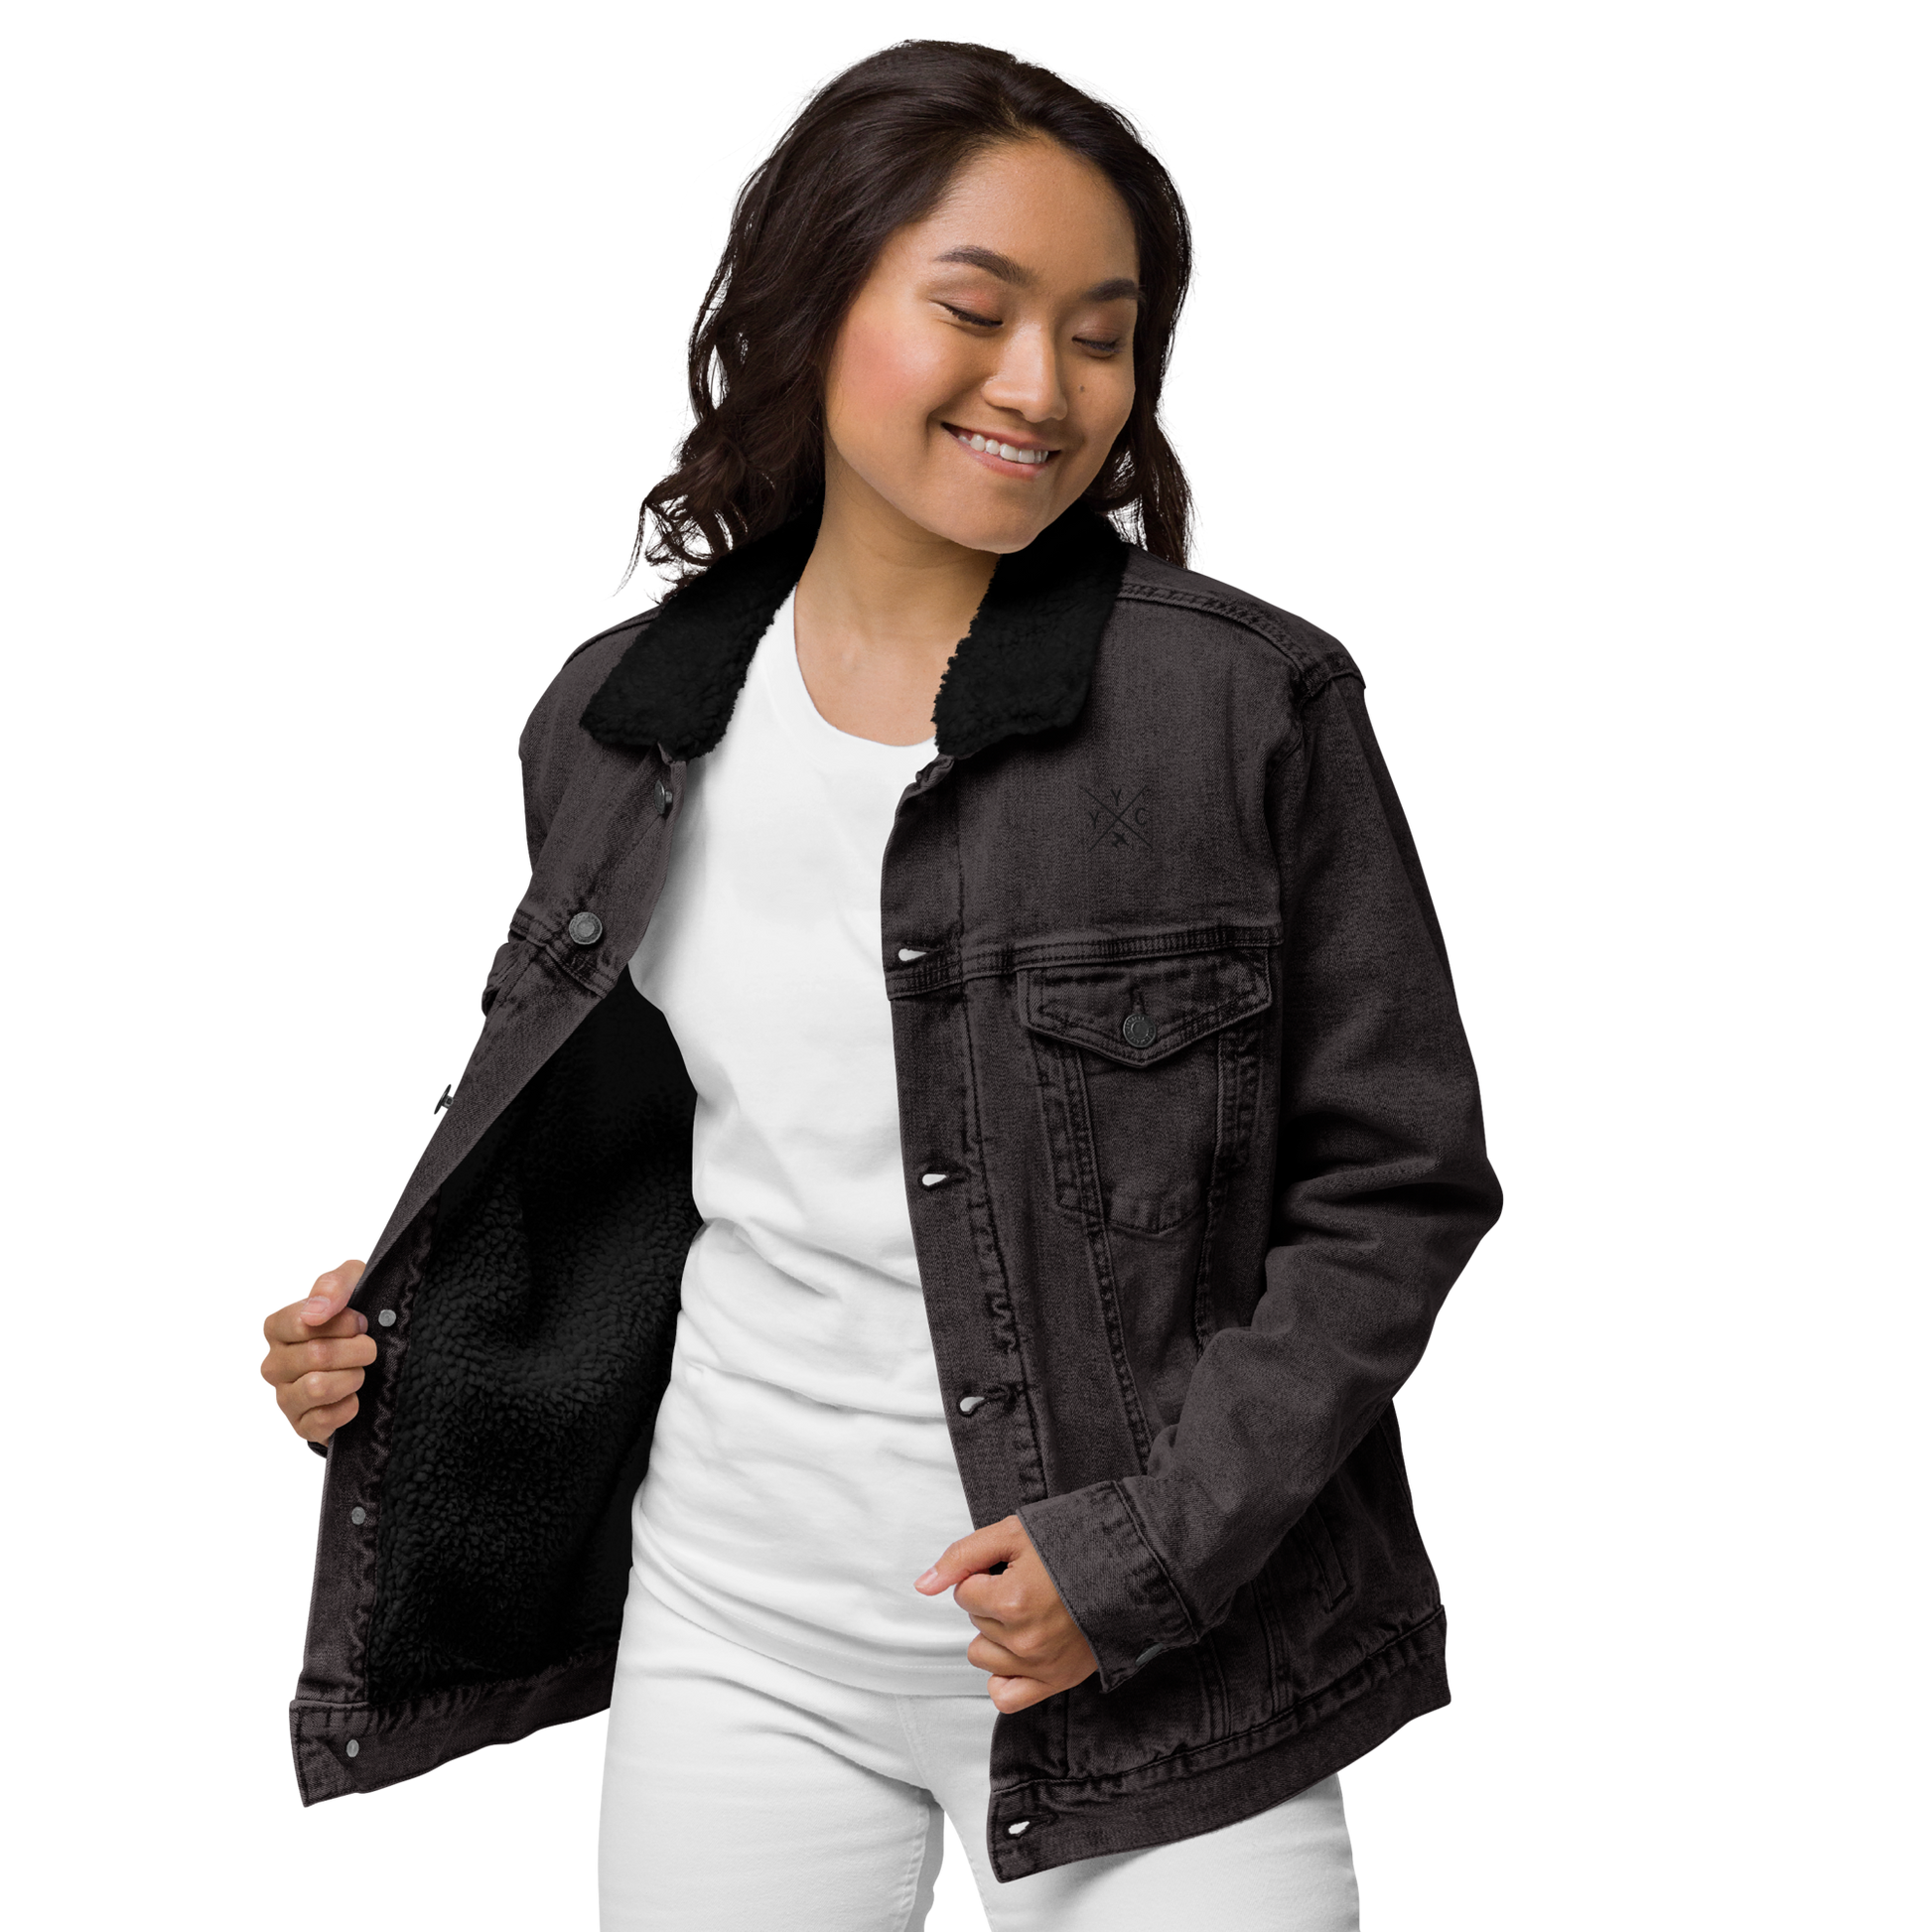 YHM Designs - YYC Calgary Denim Sherpa Jacket - Crossed-X Design with Airport Code and Vintage Propliner - Black & White Embroidery - Image 05